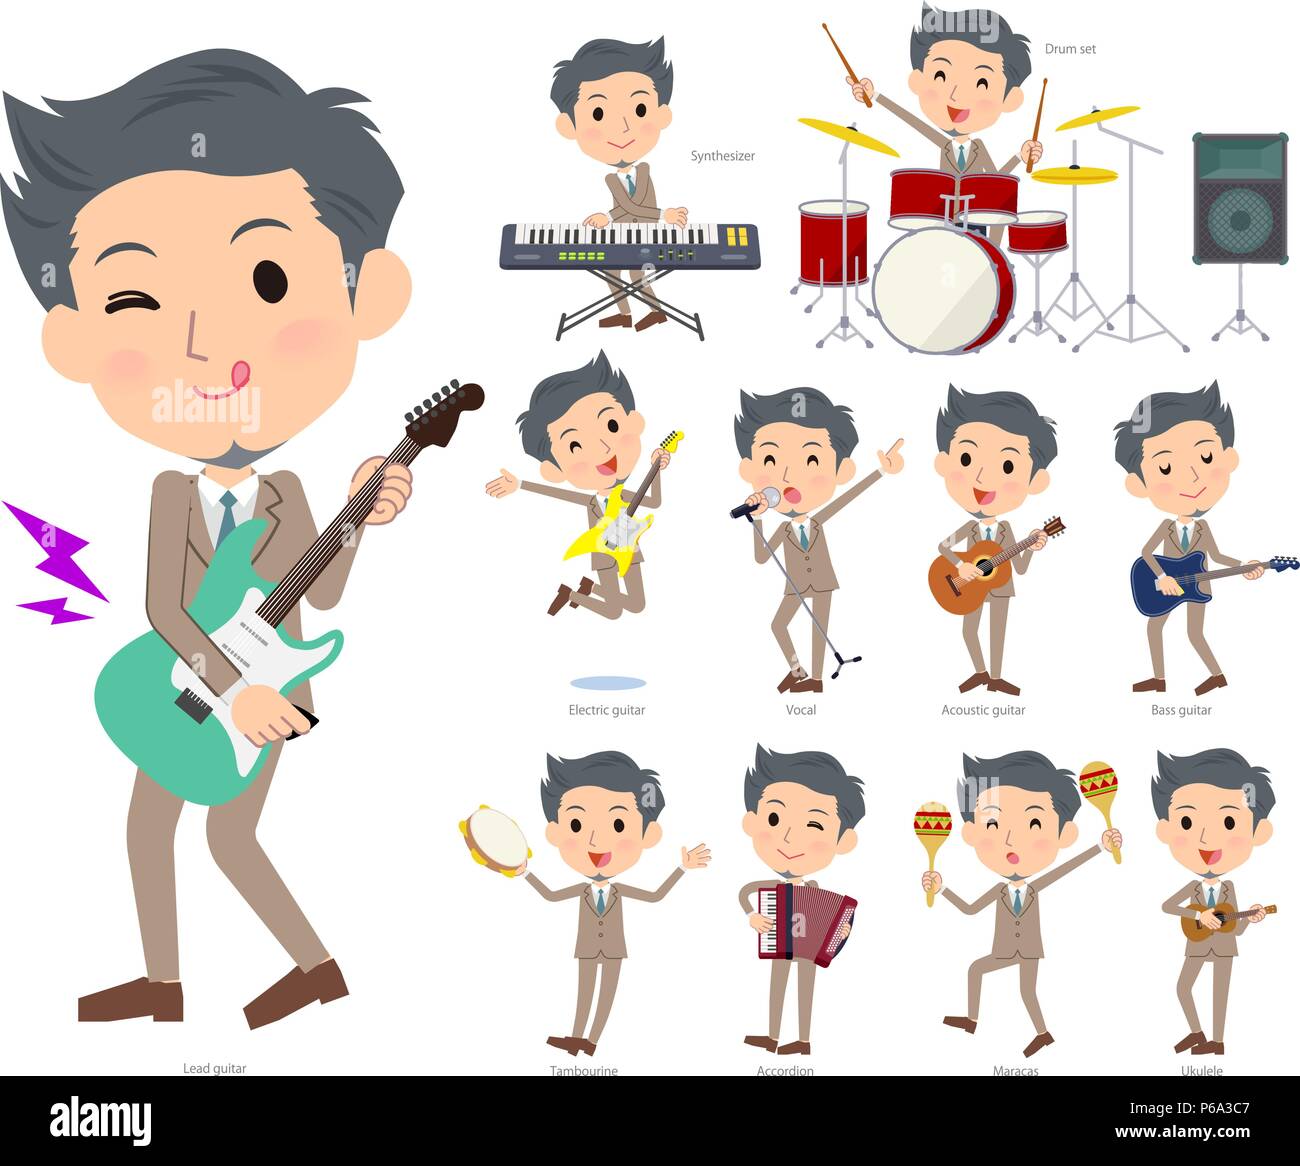 A set of businessman playing rock 'n' roll and pop music.There are also various instruments such as ukulele and tambourine.It's vector art so it's eas Stock Vector